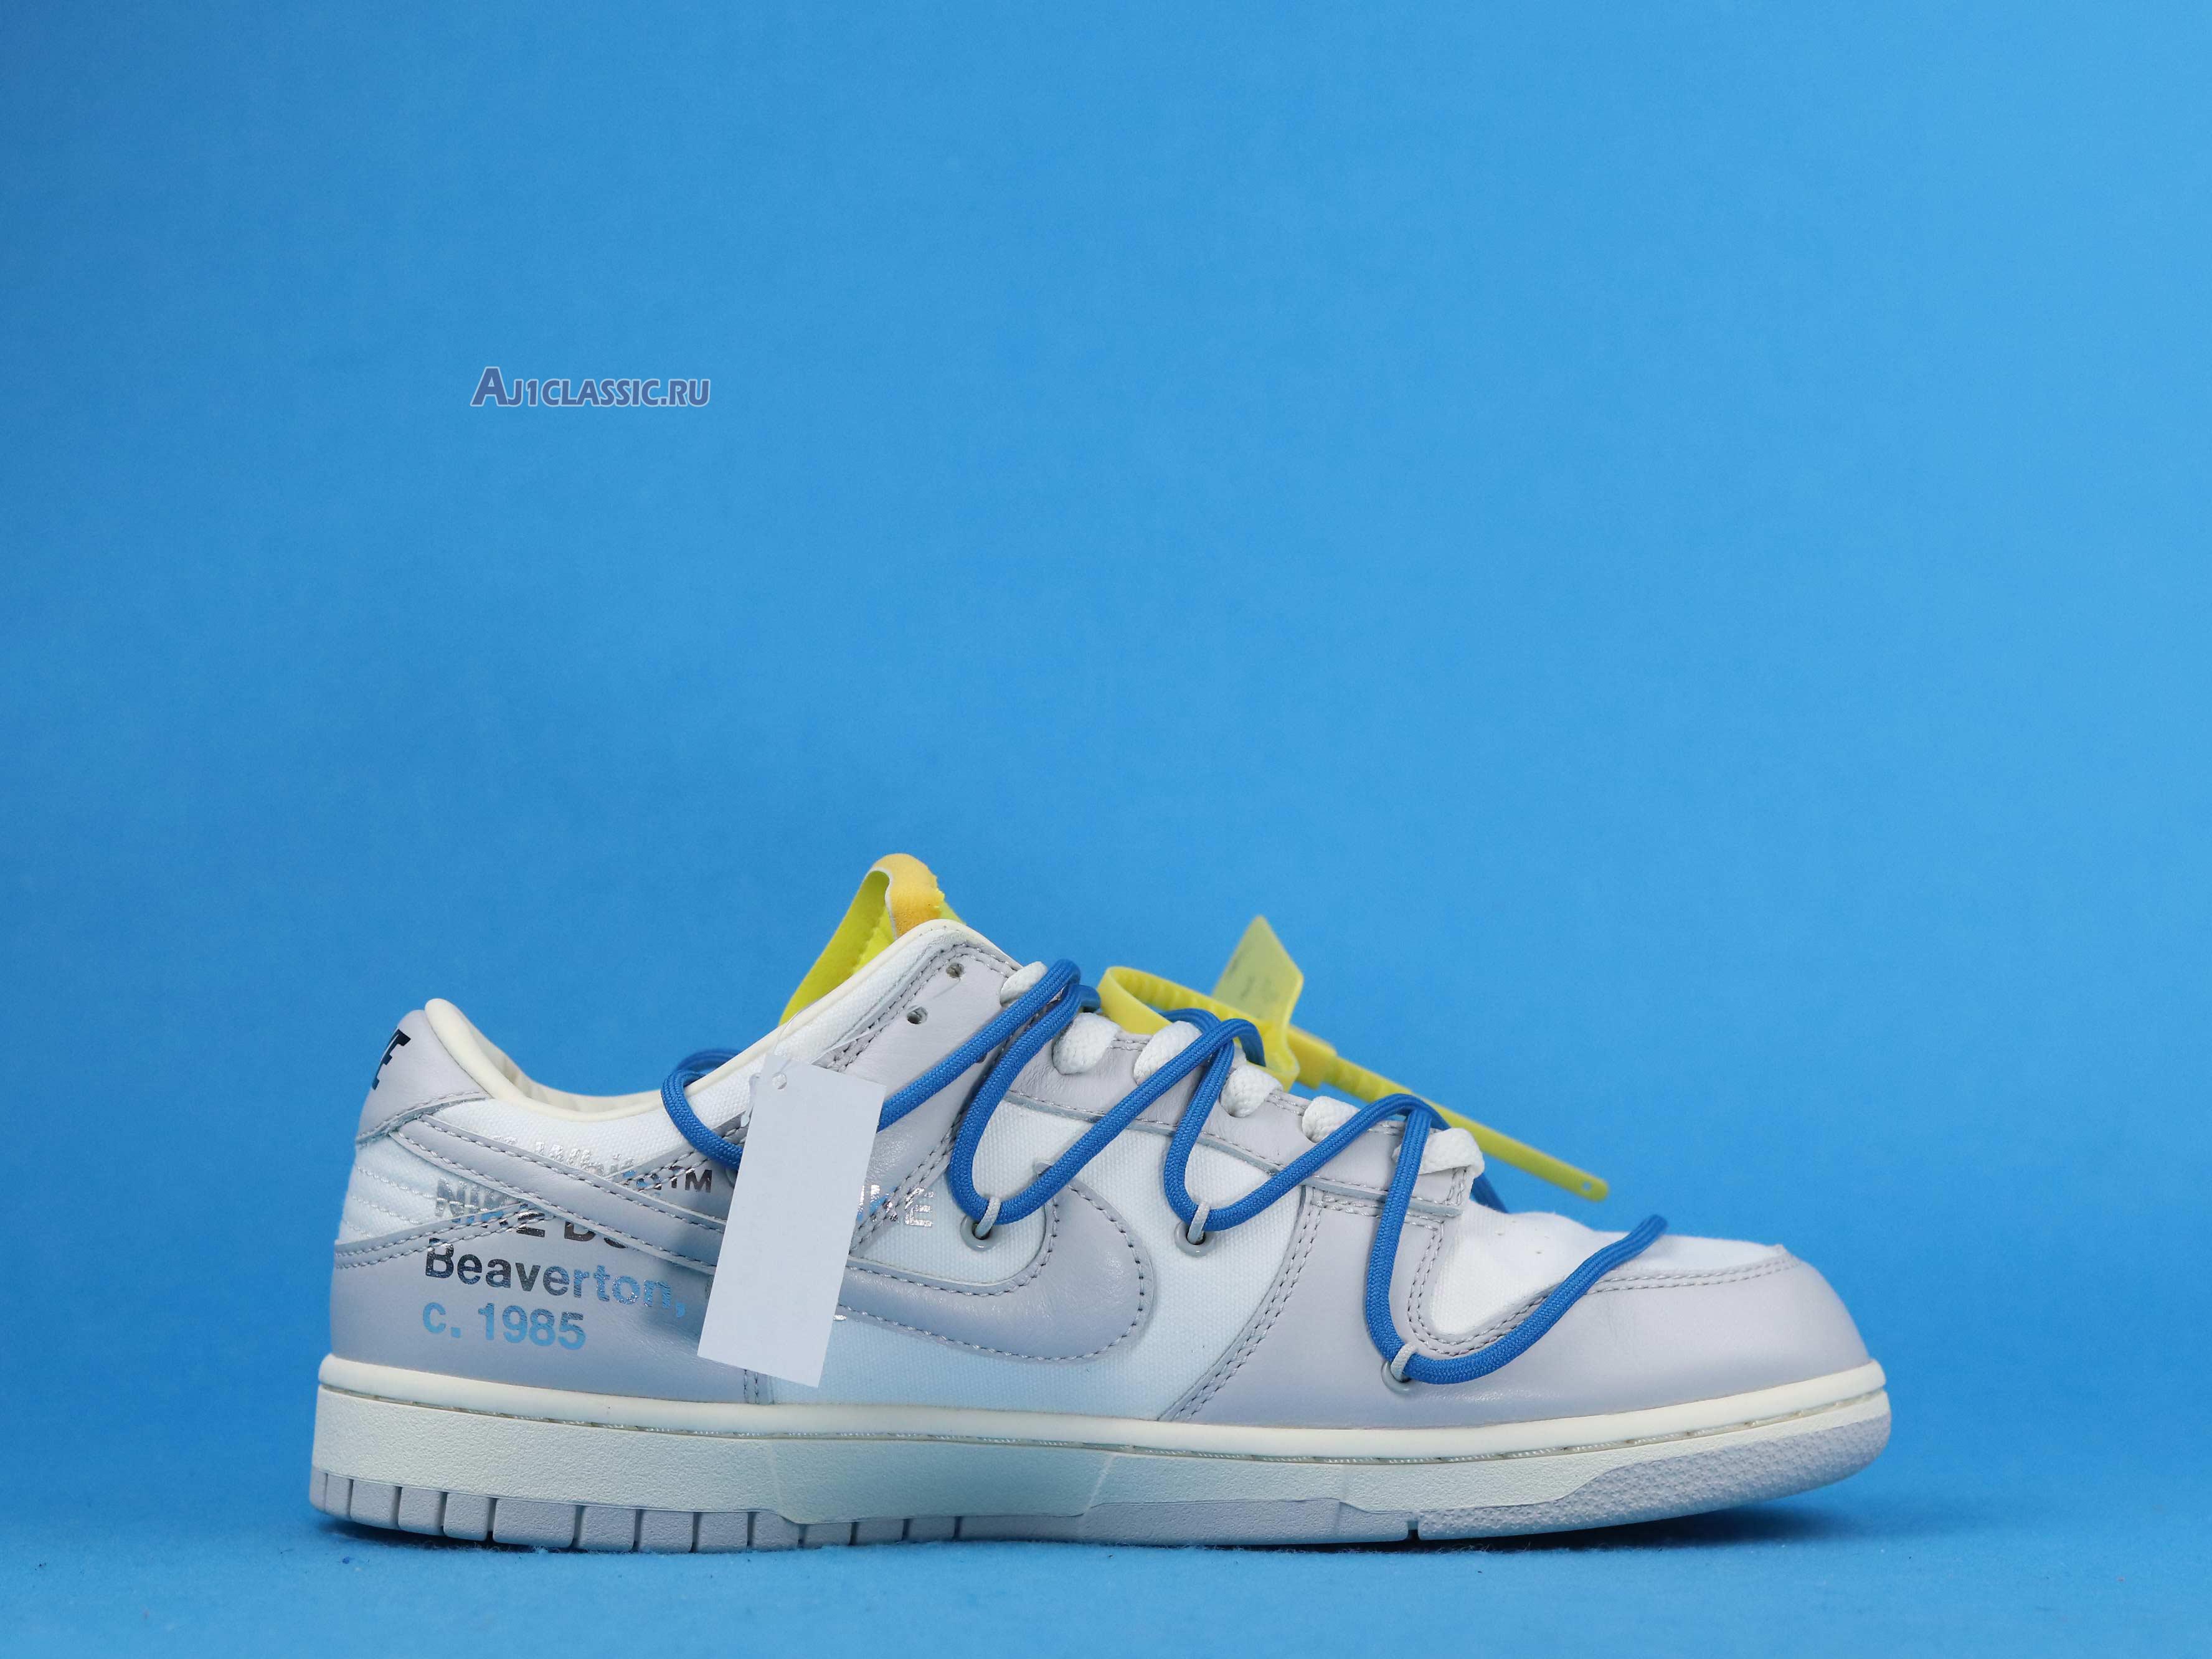 Off-White x Nike Dunk Low "Lot 10 of 50" DM1602-112